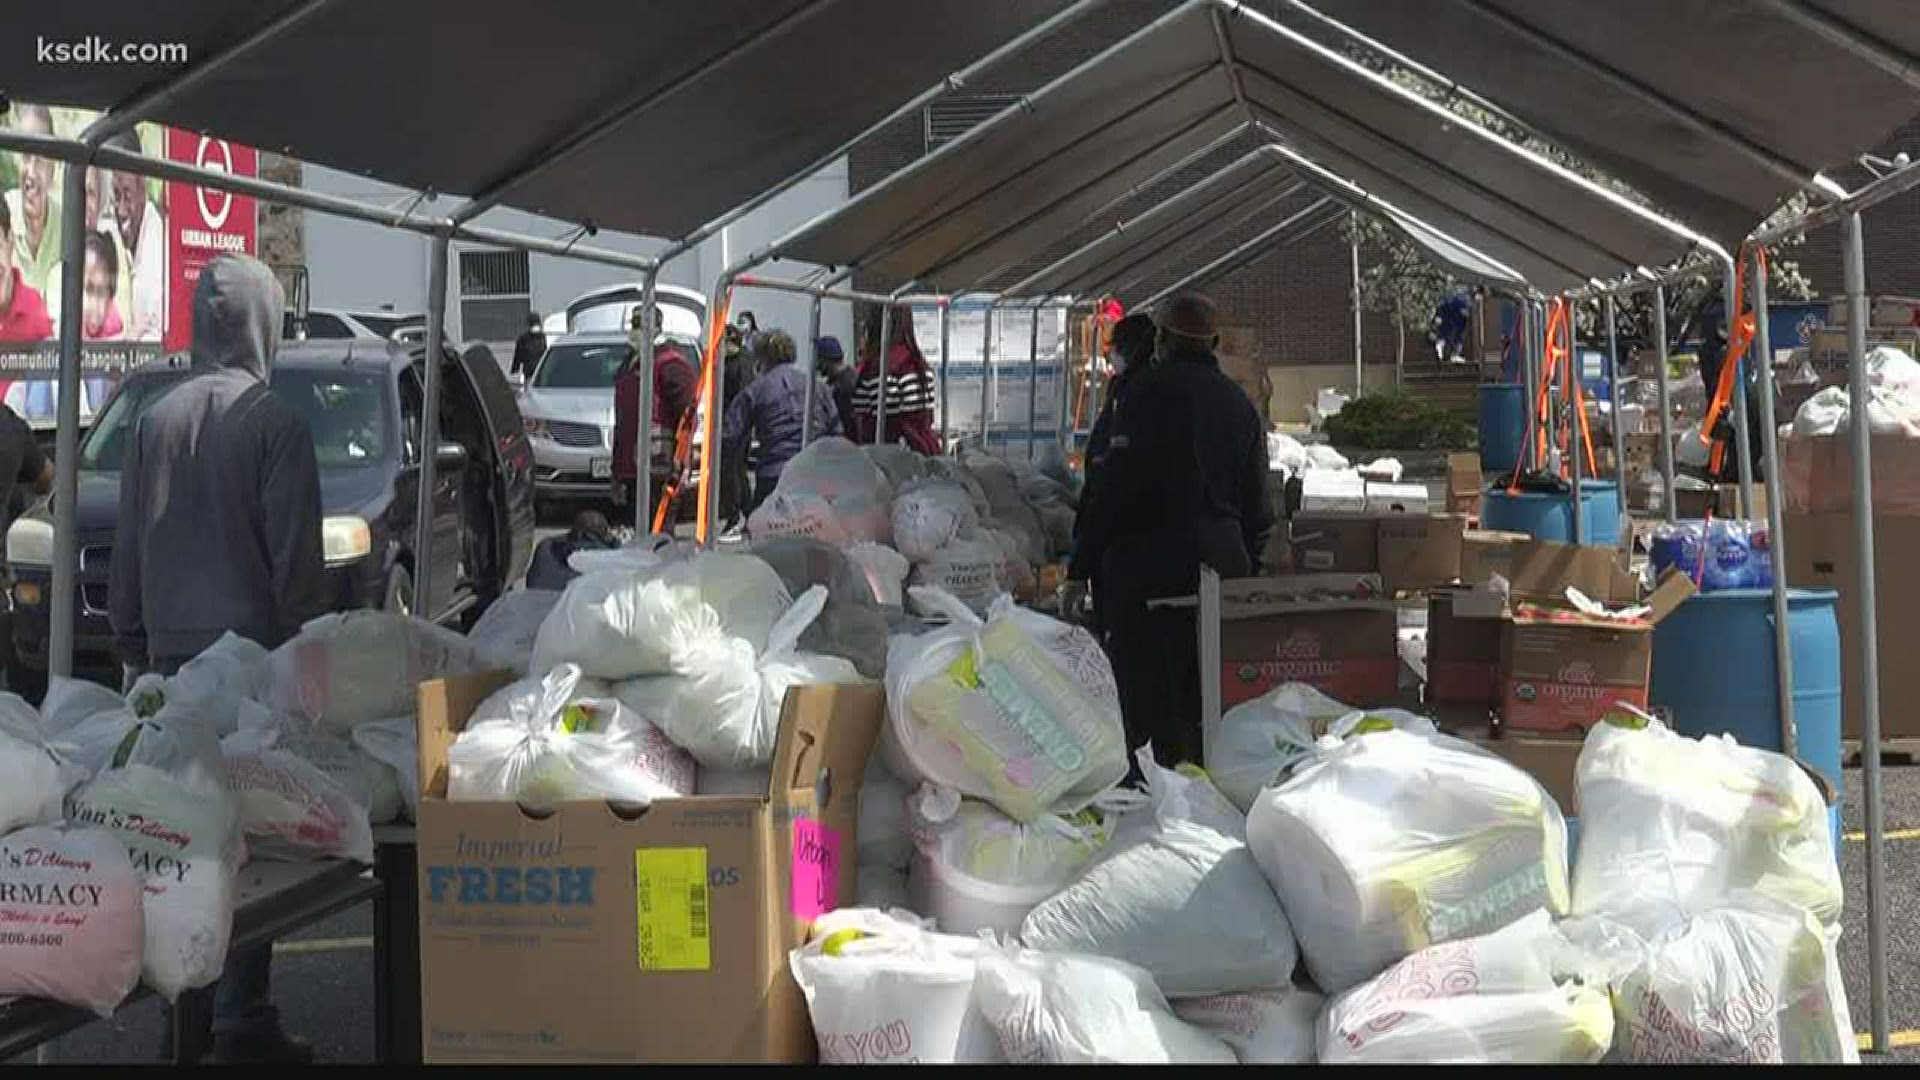 The event feeds hundreds of people in need and at previous food events, cars were lined up for hours.